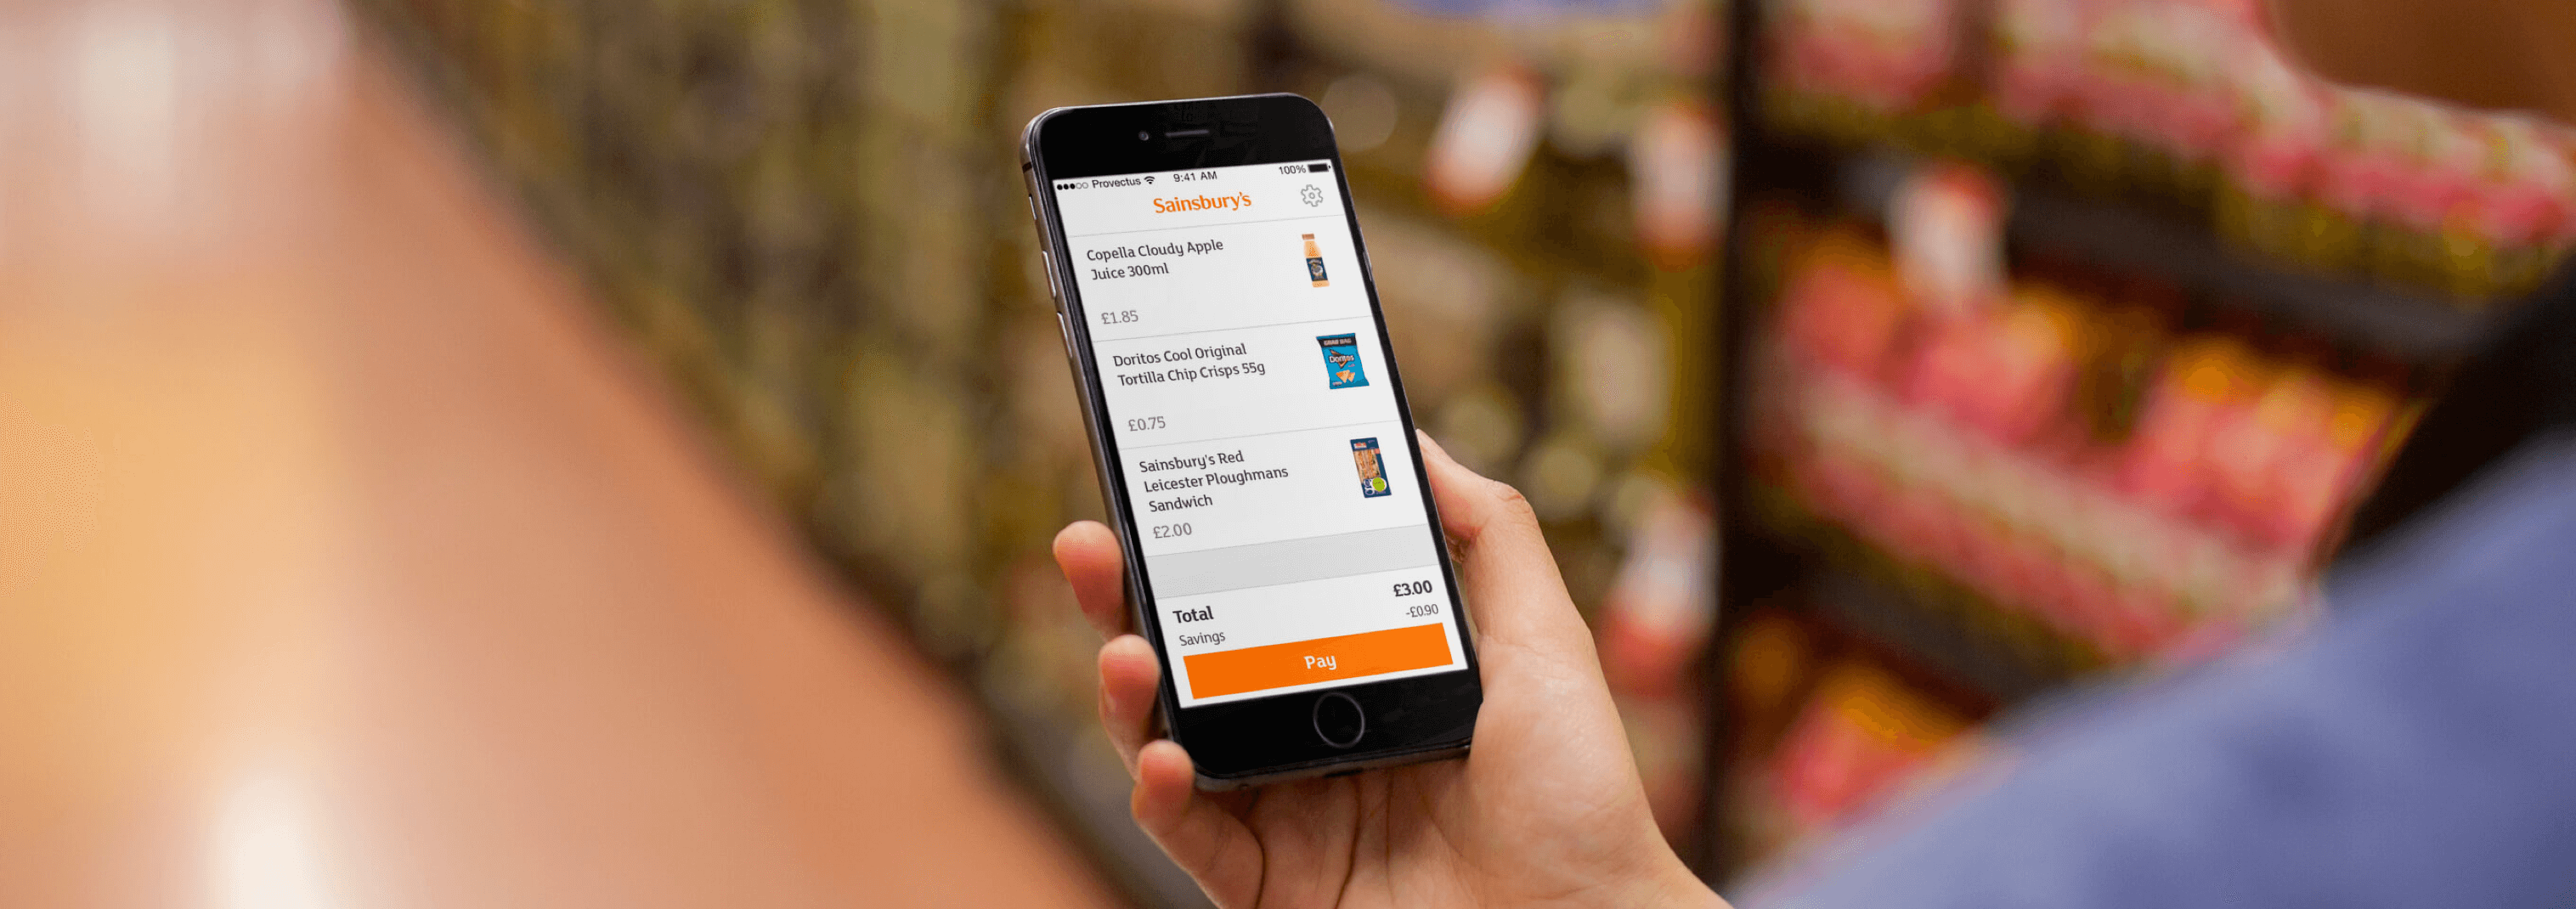 Creating a better checkout experience at Sainsbury's | by Ben Brewer |  Sainsbury's Tech Engineering | Medium